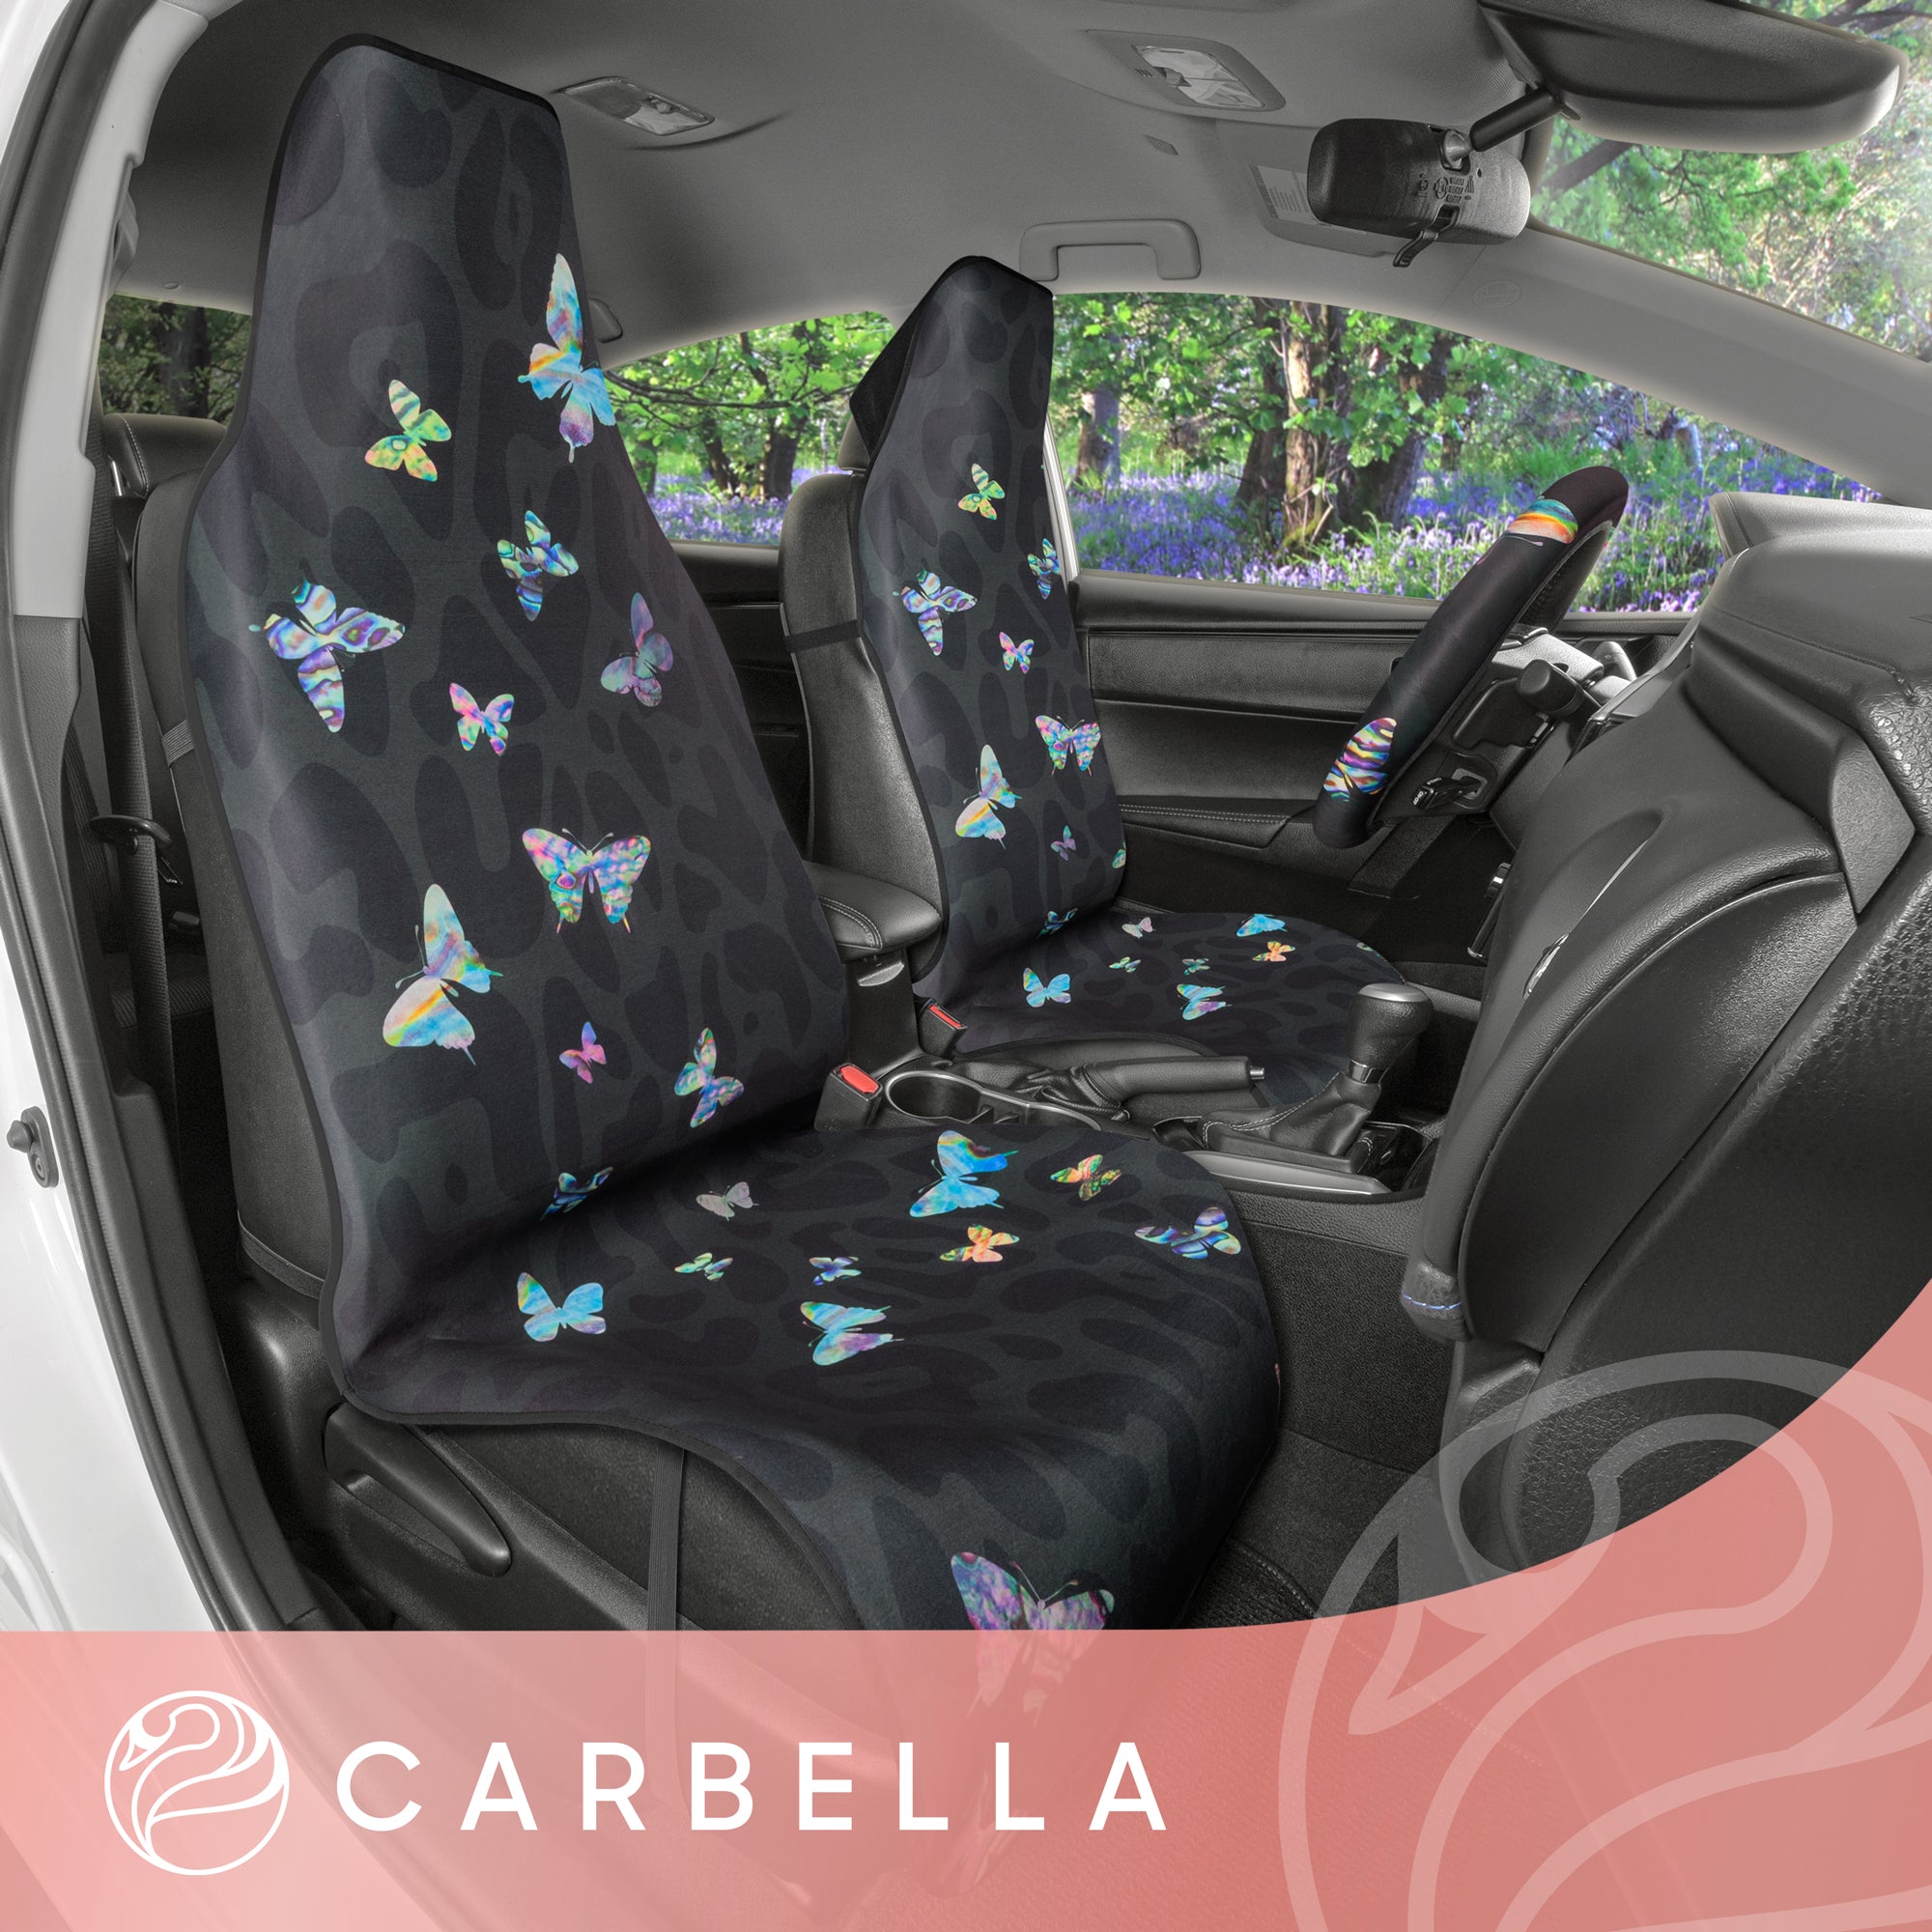 Carbella Black Leopard & Butterfly Car Seat Covers, 2 Pack Animal Print Front Seat Covers for Cars Trucks SUV, Car Accessories for Women